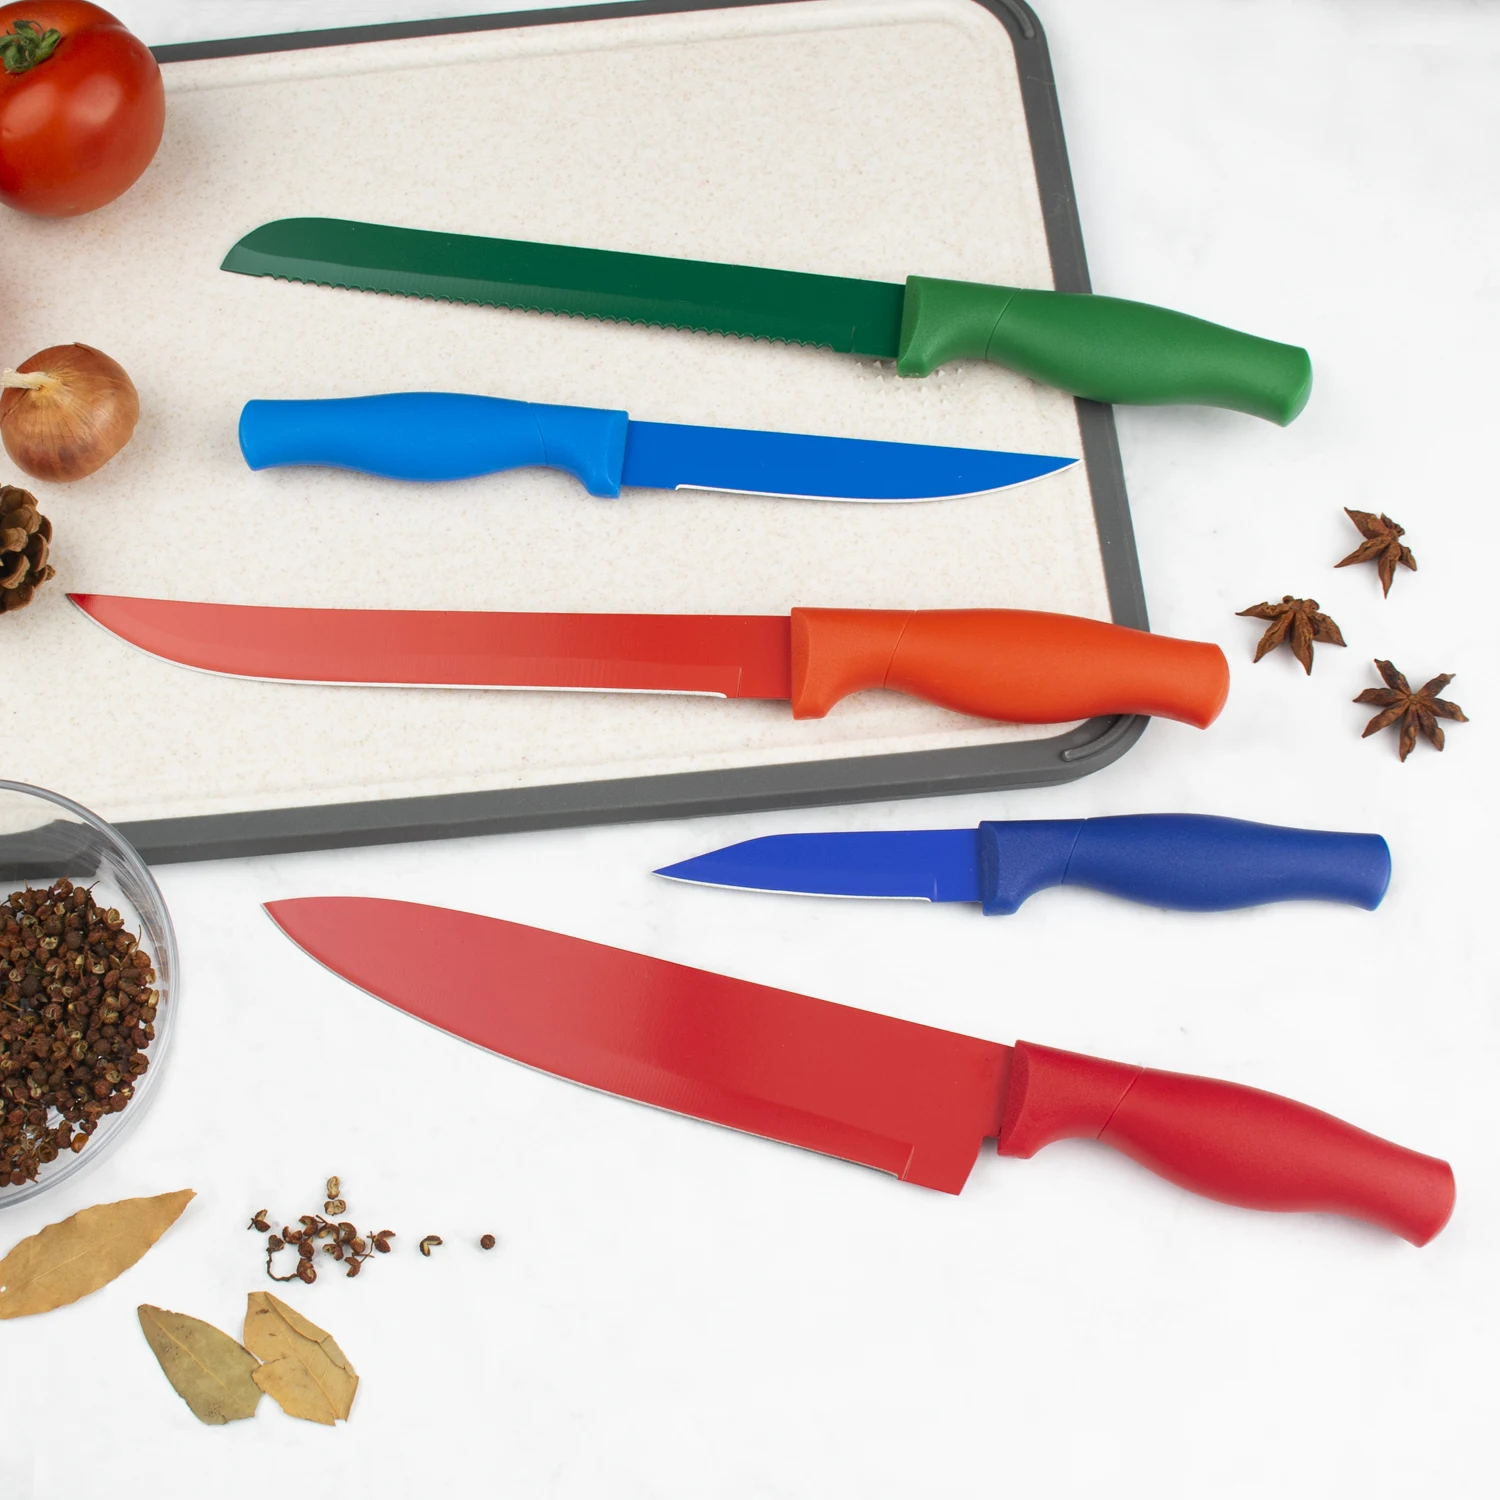 

Wholesale 5 pcs stainless steel colorful non-stick sharp cooking coating Kitchen Knife Set with PP handle